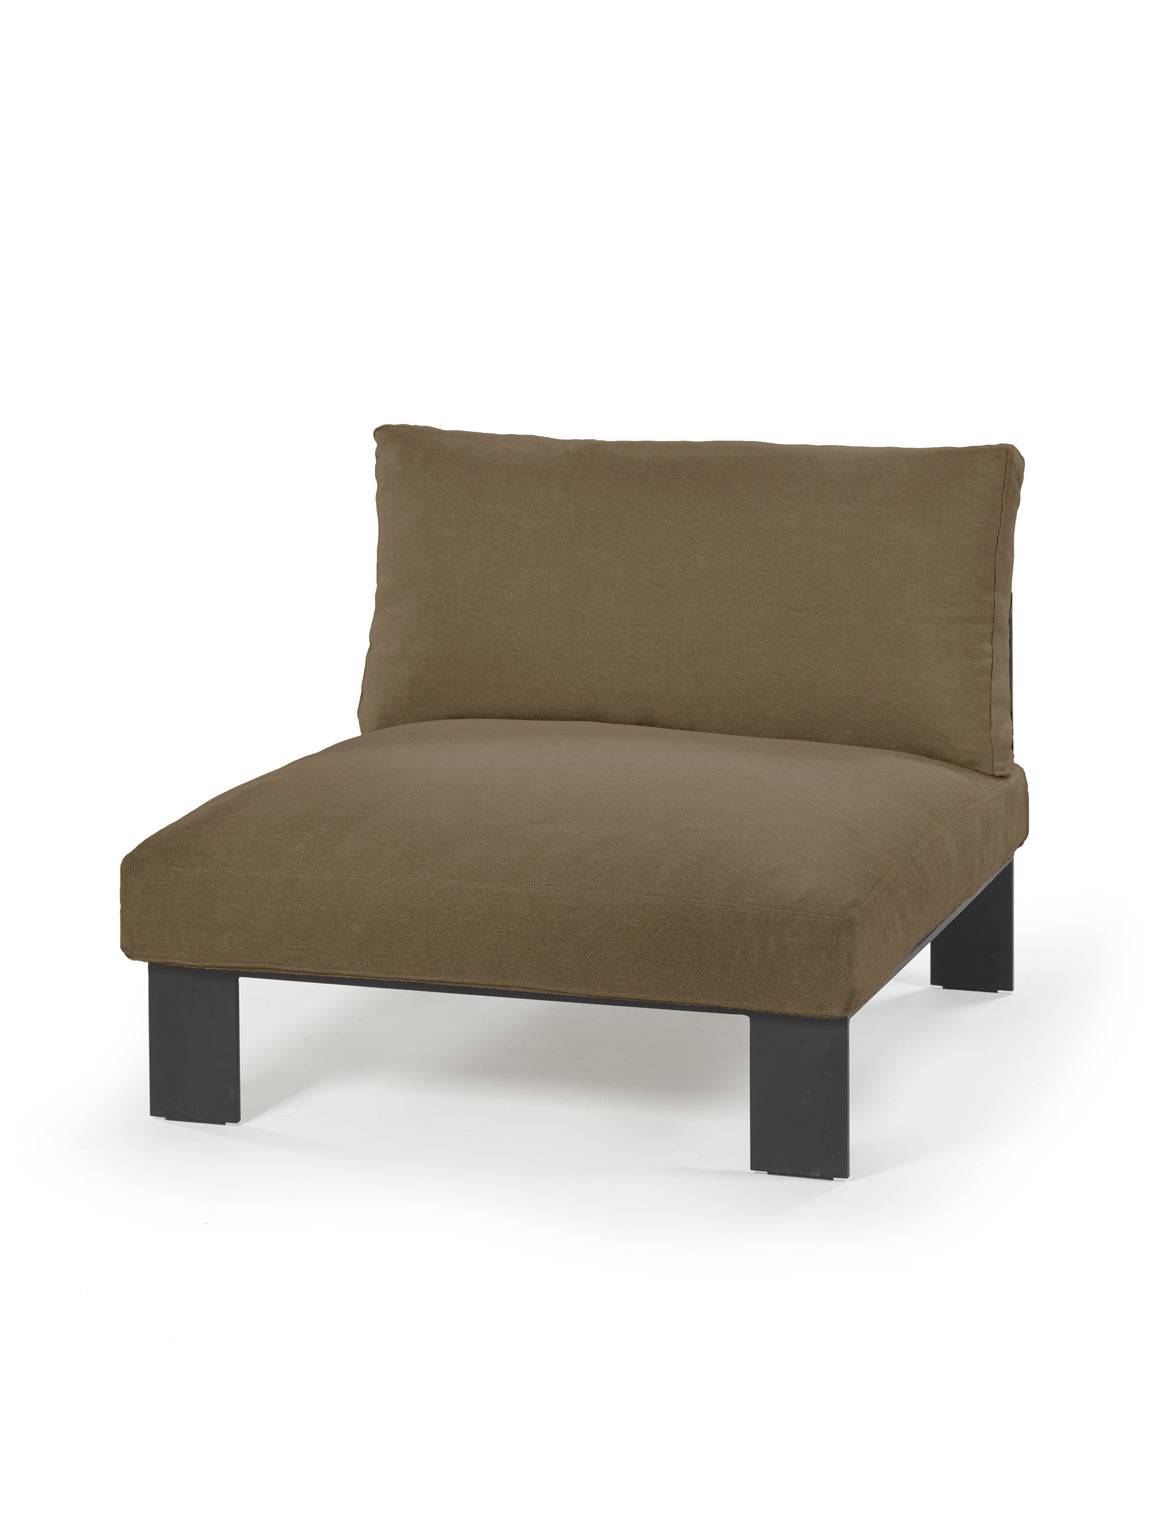 Mombaers Outdoor Lounge Chair - Camel